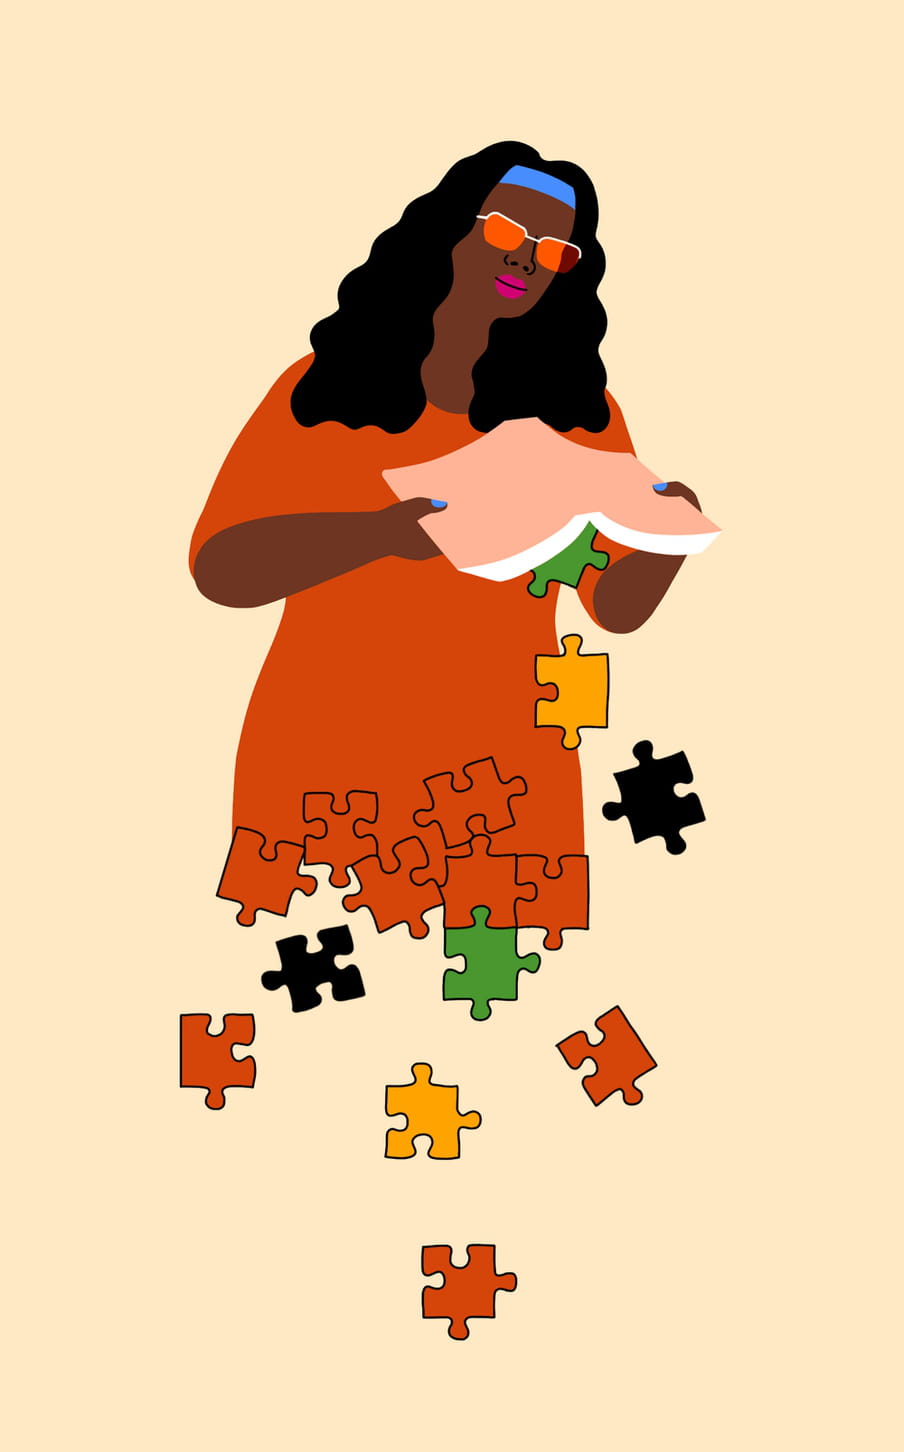 Illustration of a human figure opening a book from which puzzle pieces are falling.